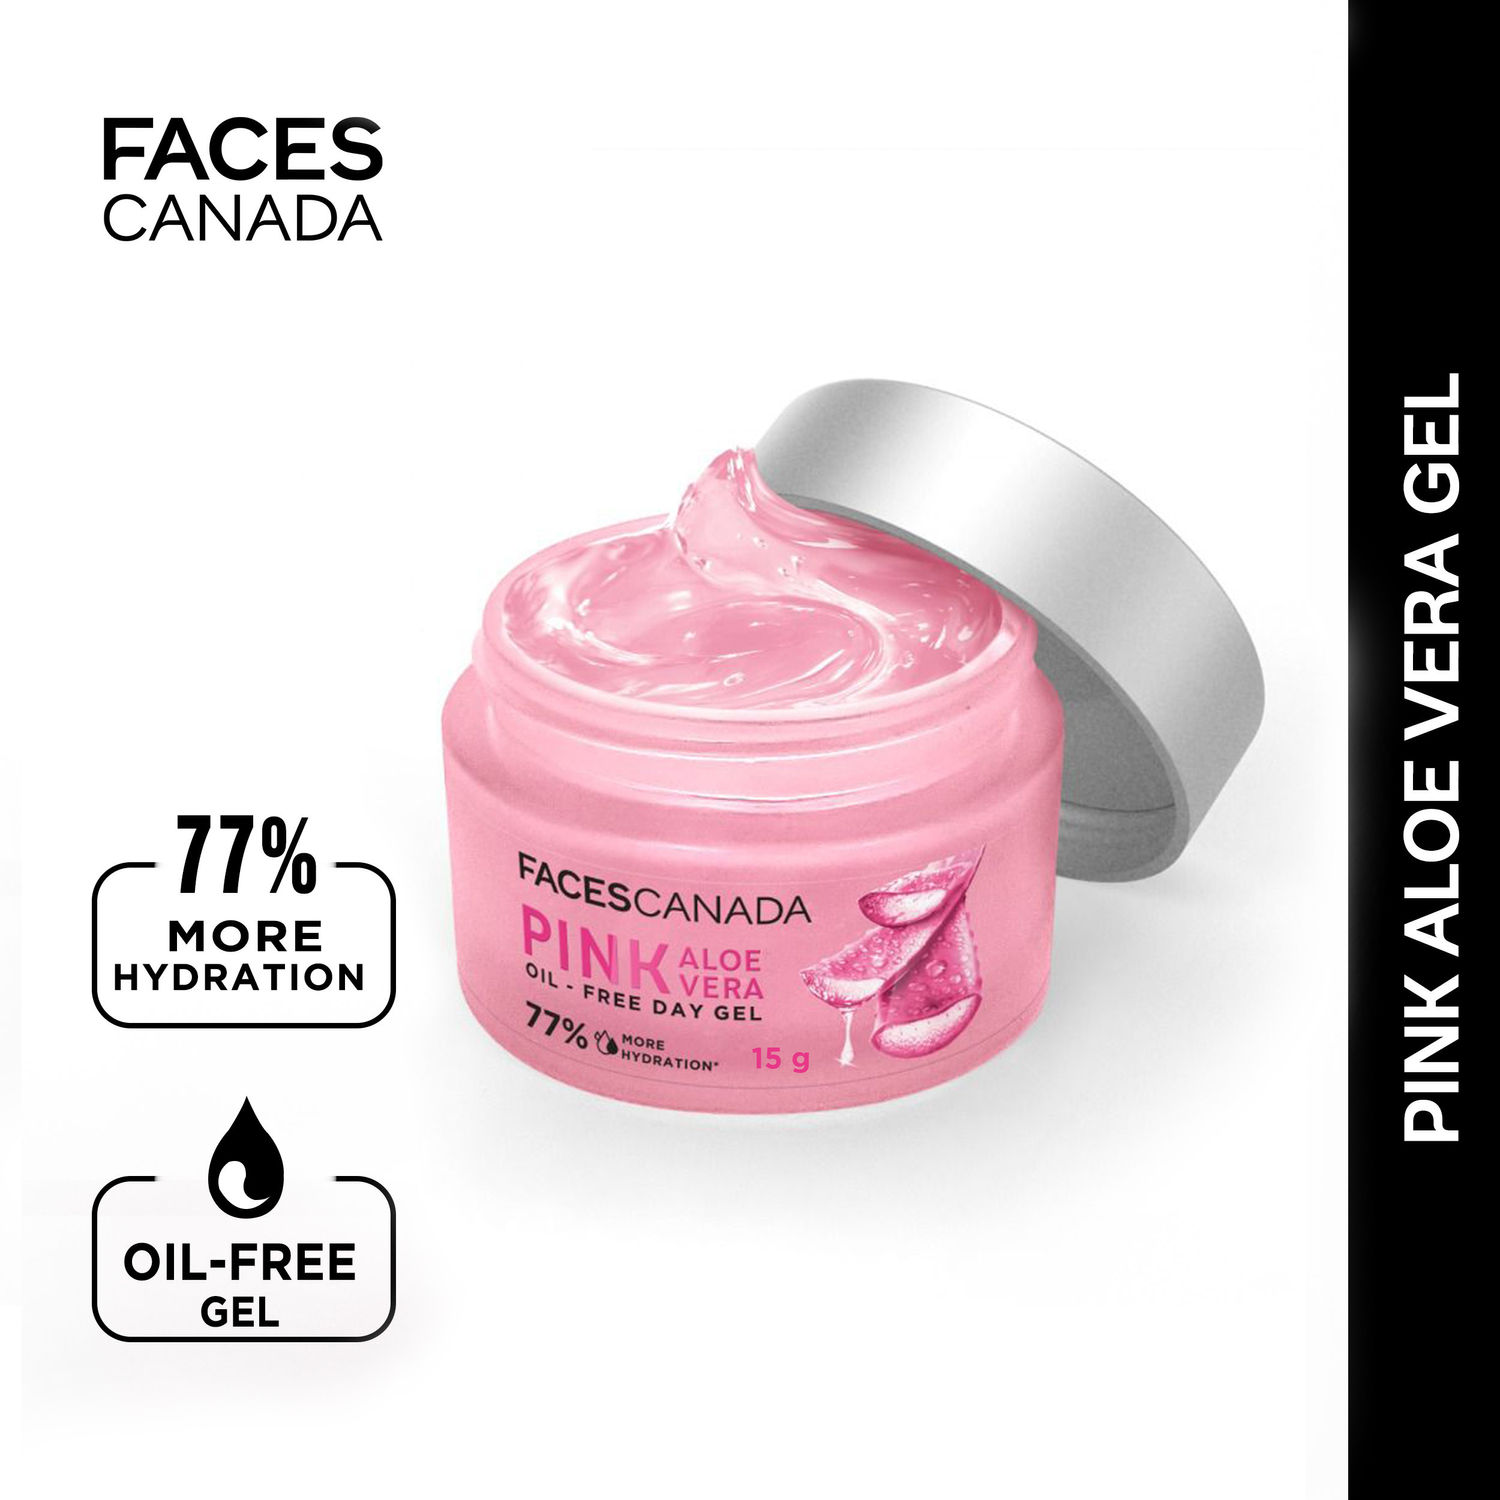 Faces canada Pink Aloe Vera Oil-Free Day Gel | 1.5% Hyaluronic Acid | Intense Hydration 15g